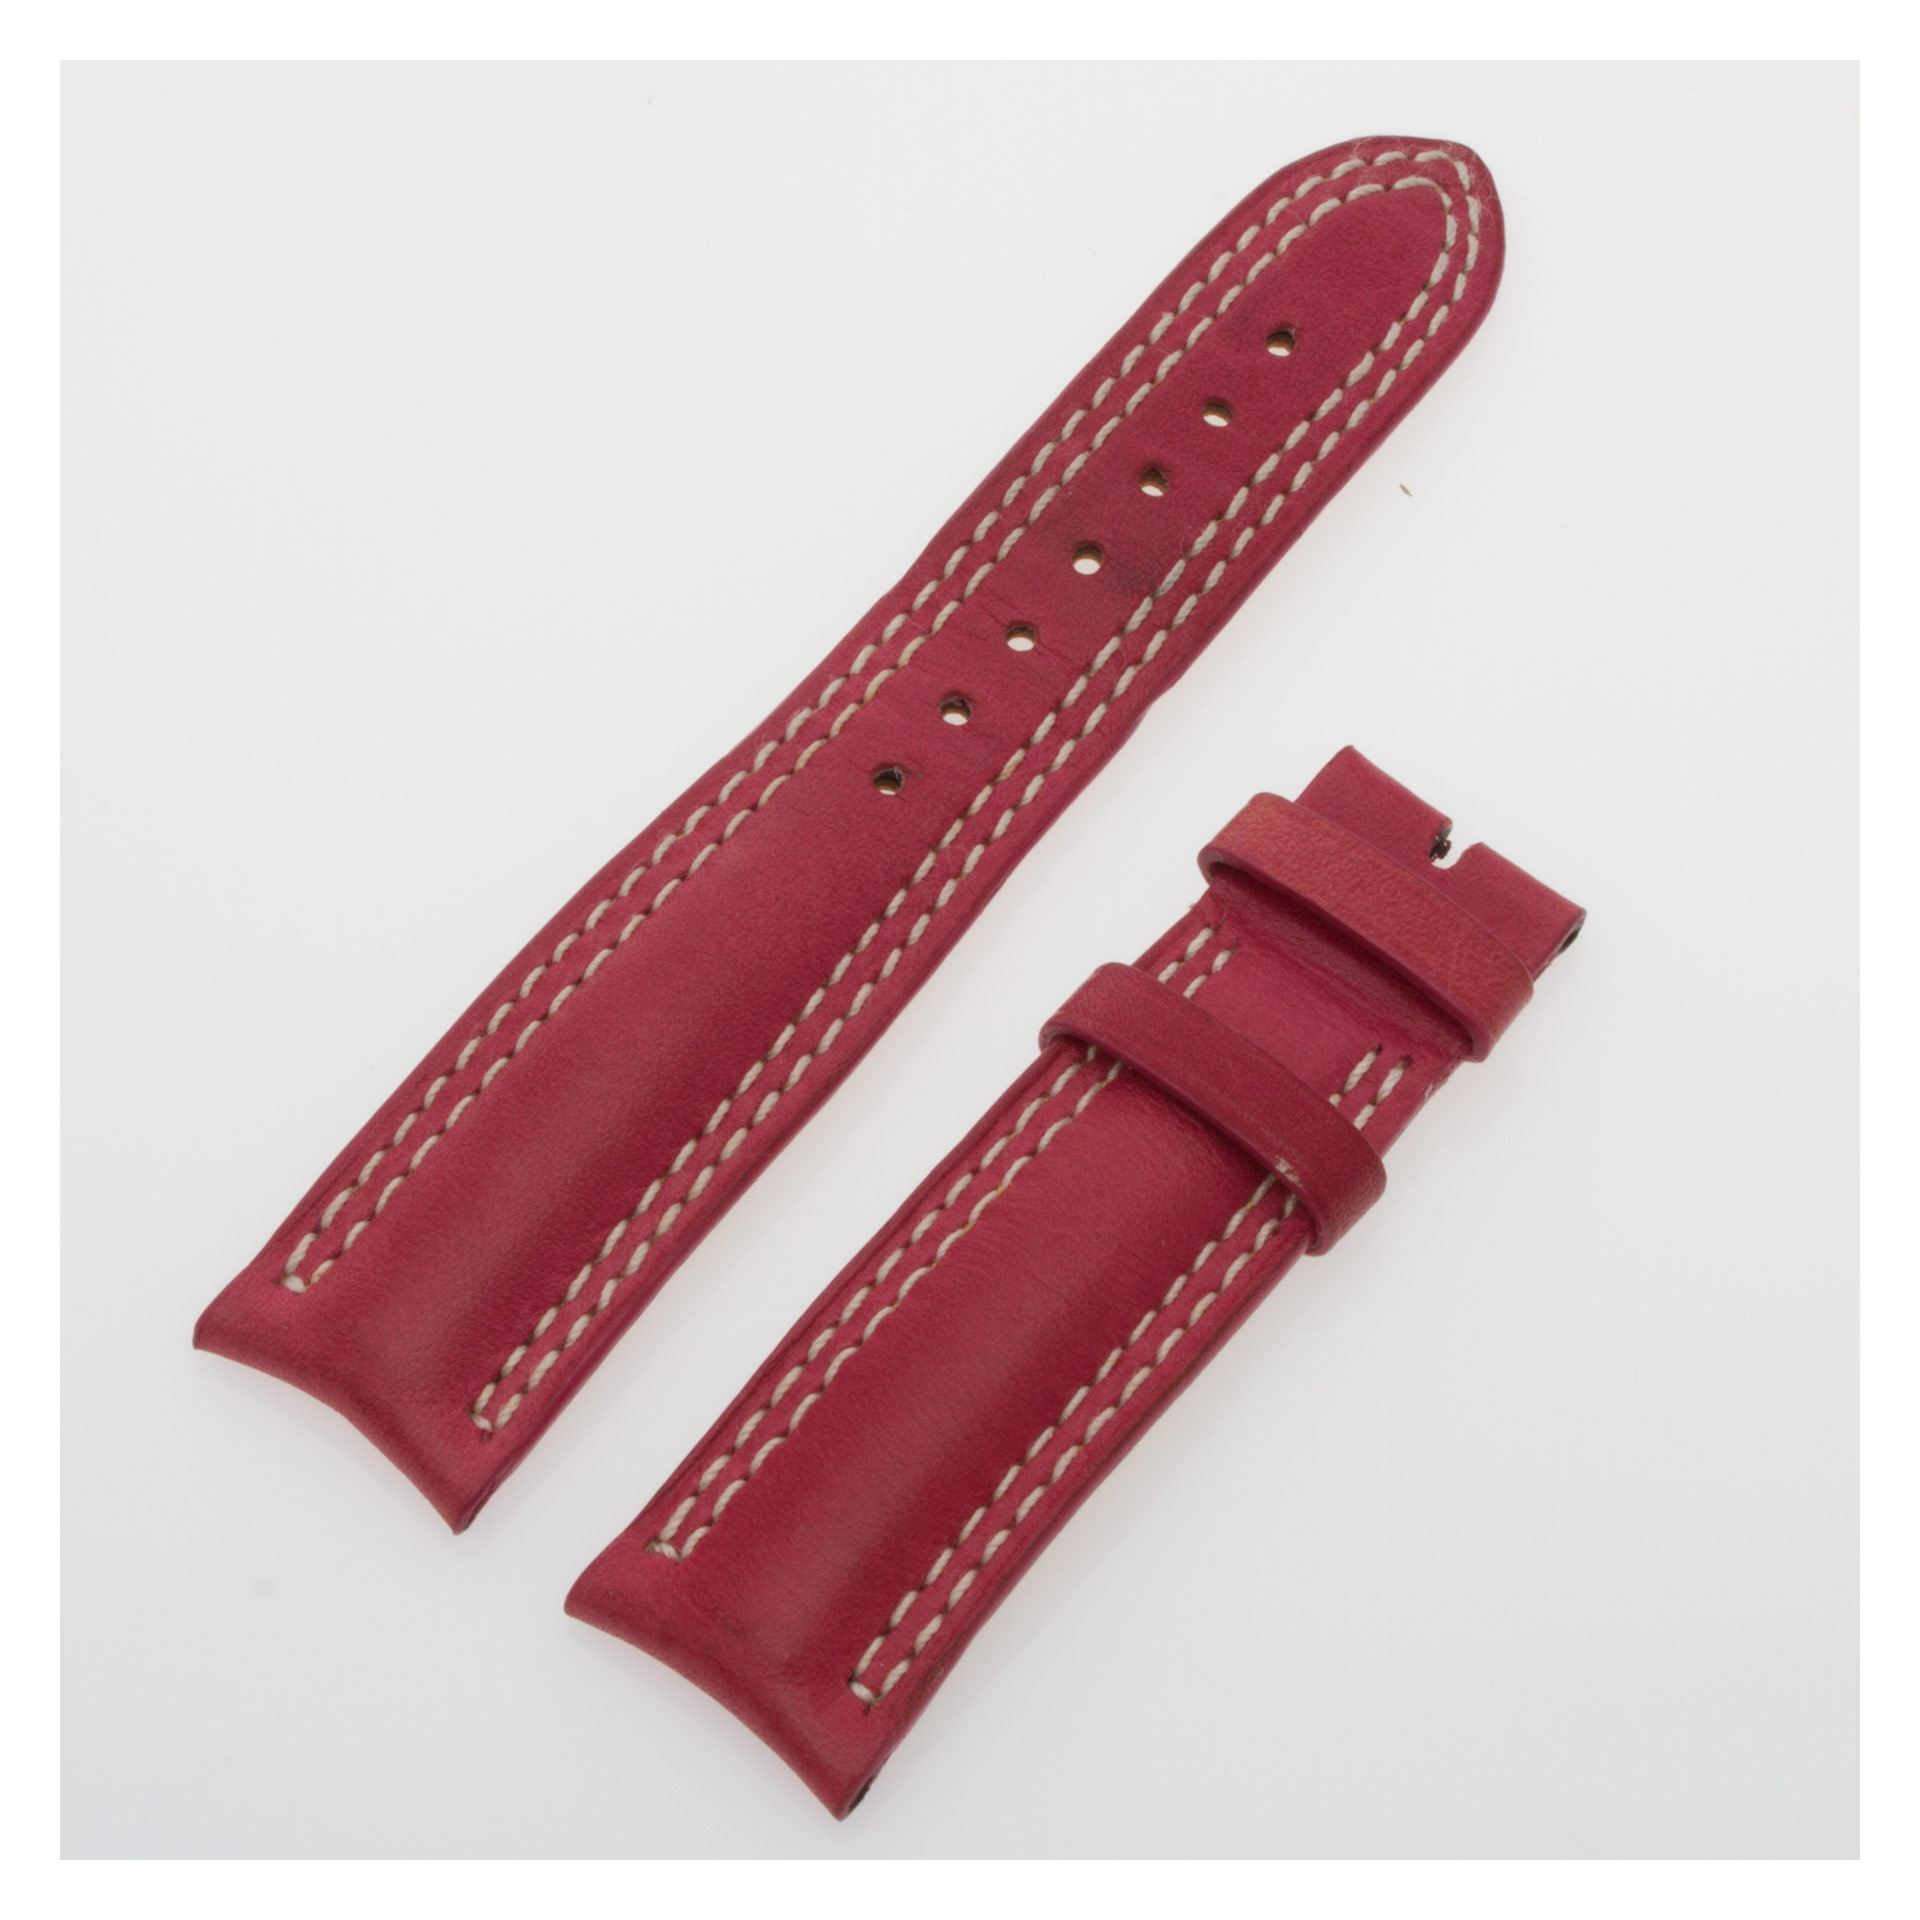 Jaeger-LeCoultre red calfskin strap with white stitch (18x16)